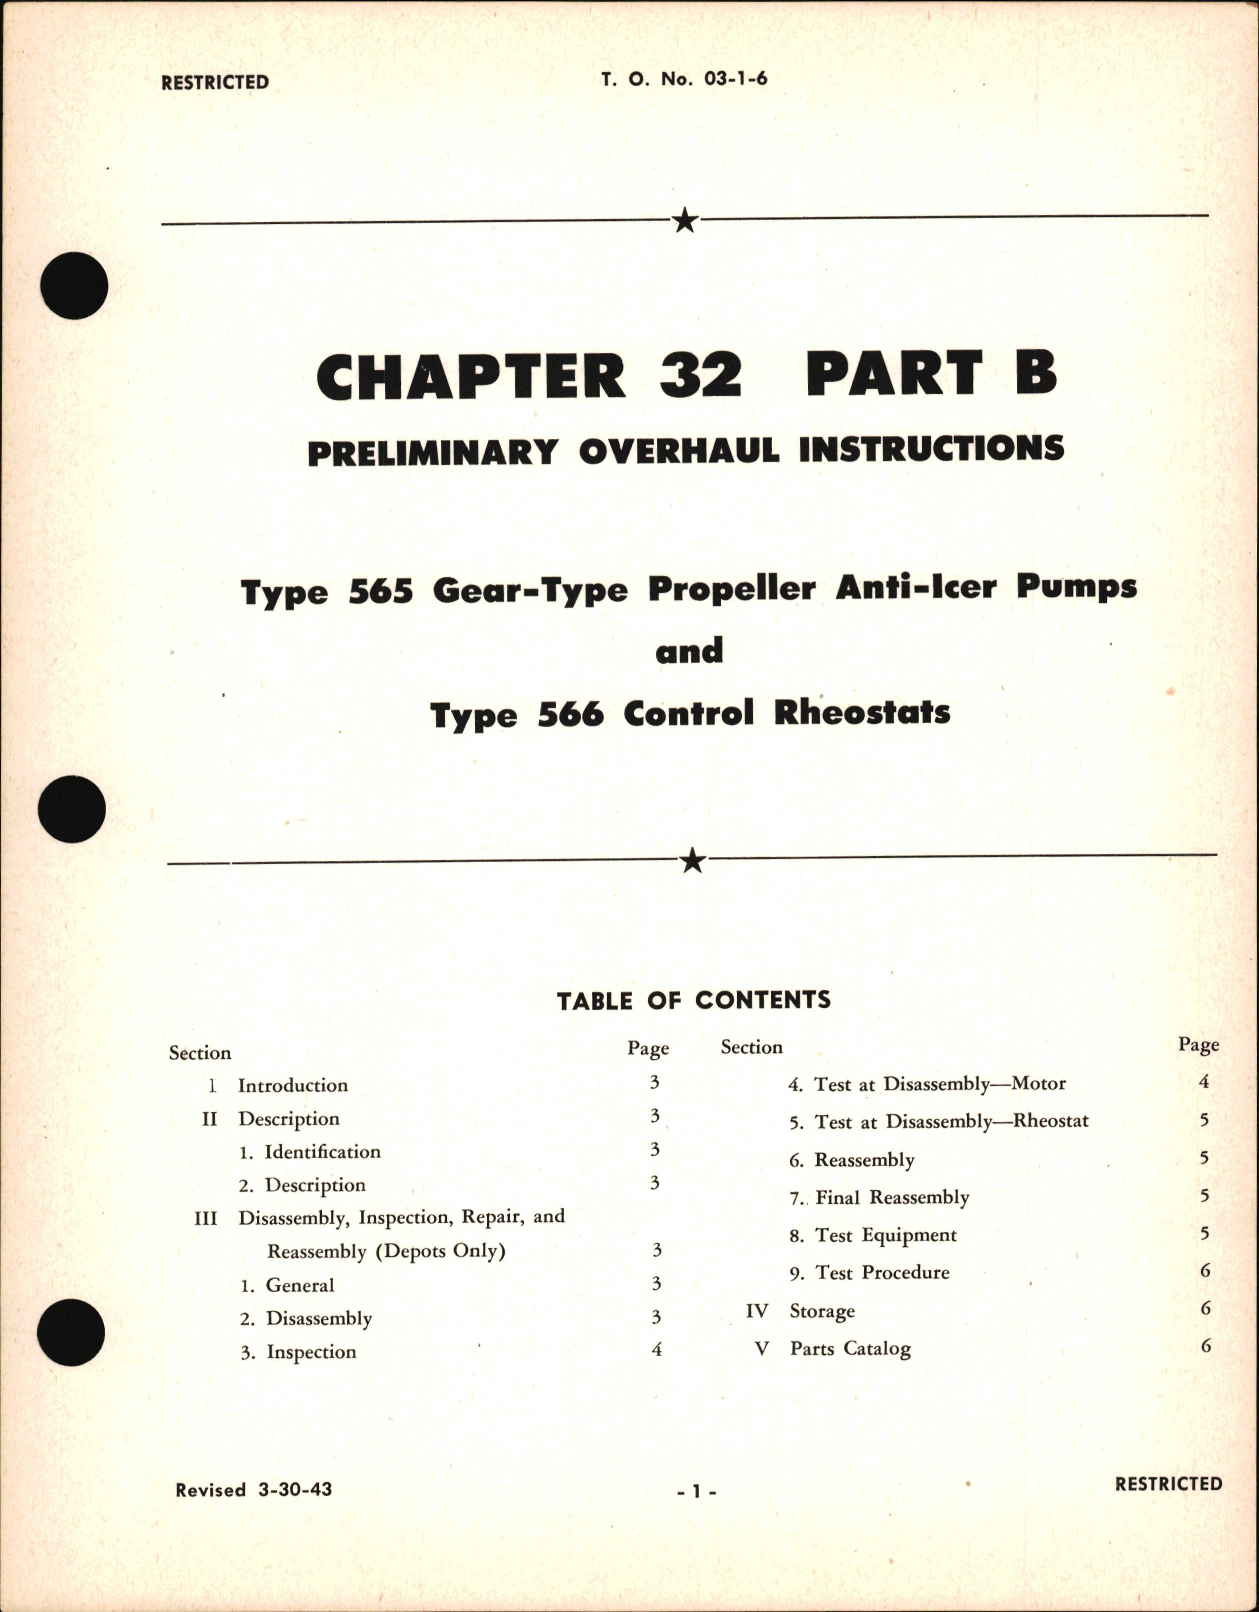 Sample page 1 from AirCorps Library document: Preliminary Overhaul Instructions for Gear Type Propeller Anti-Icer Pumps & Control Rheostats, Chapter 32 Part B